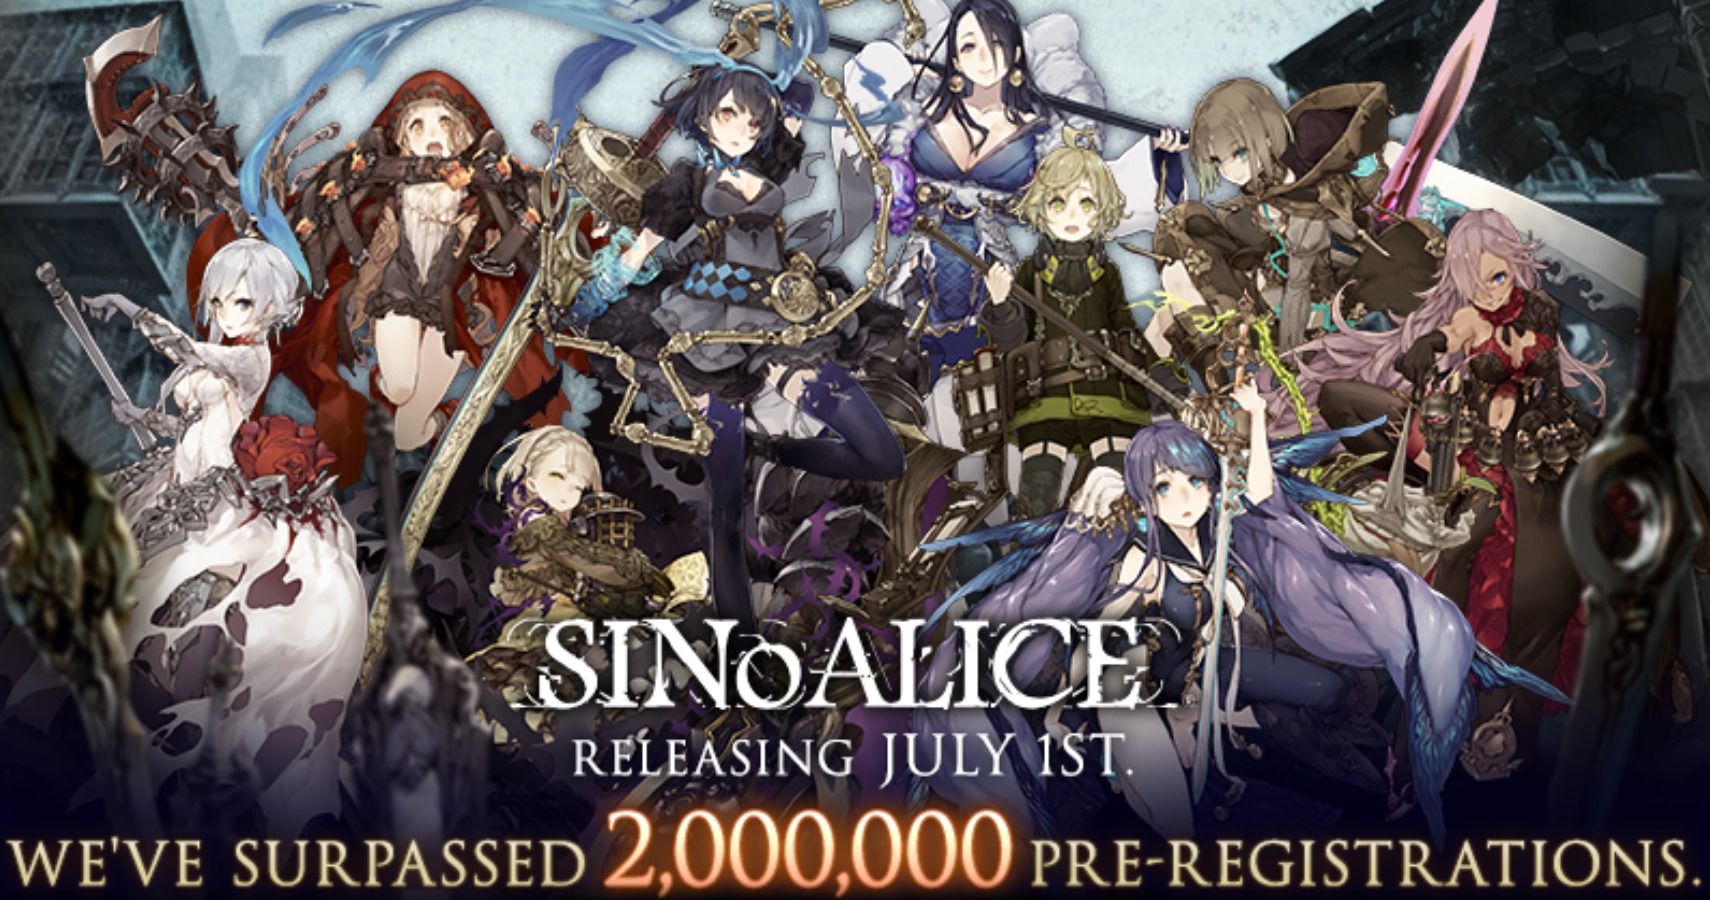 SINoALICE has reached 2,000,000 pre-registrations